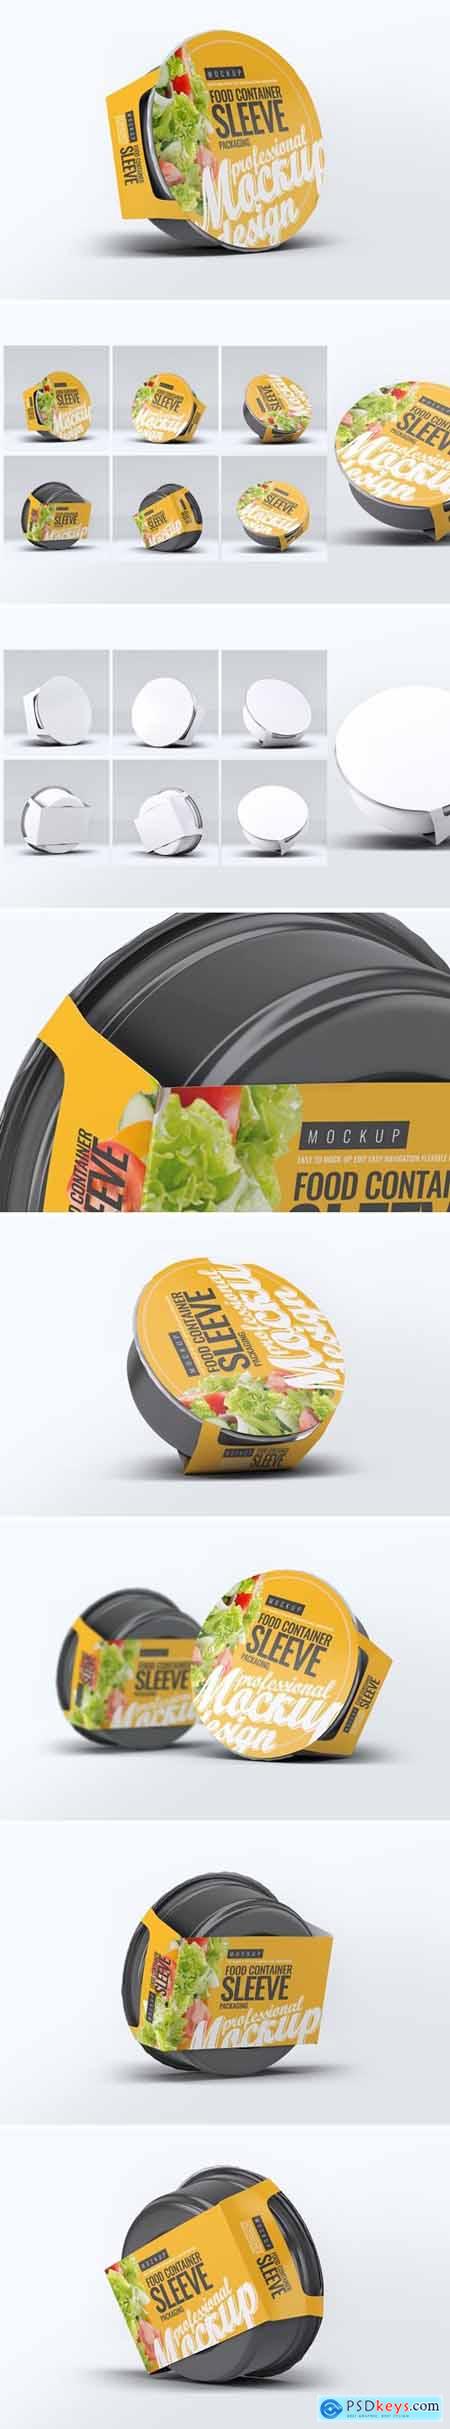 Food Container Sleeve Packaging Mock-Up v.1